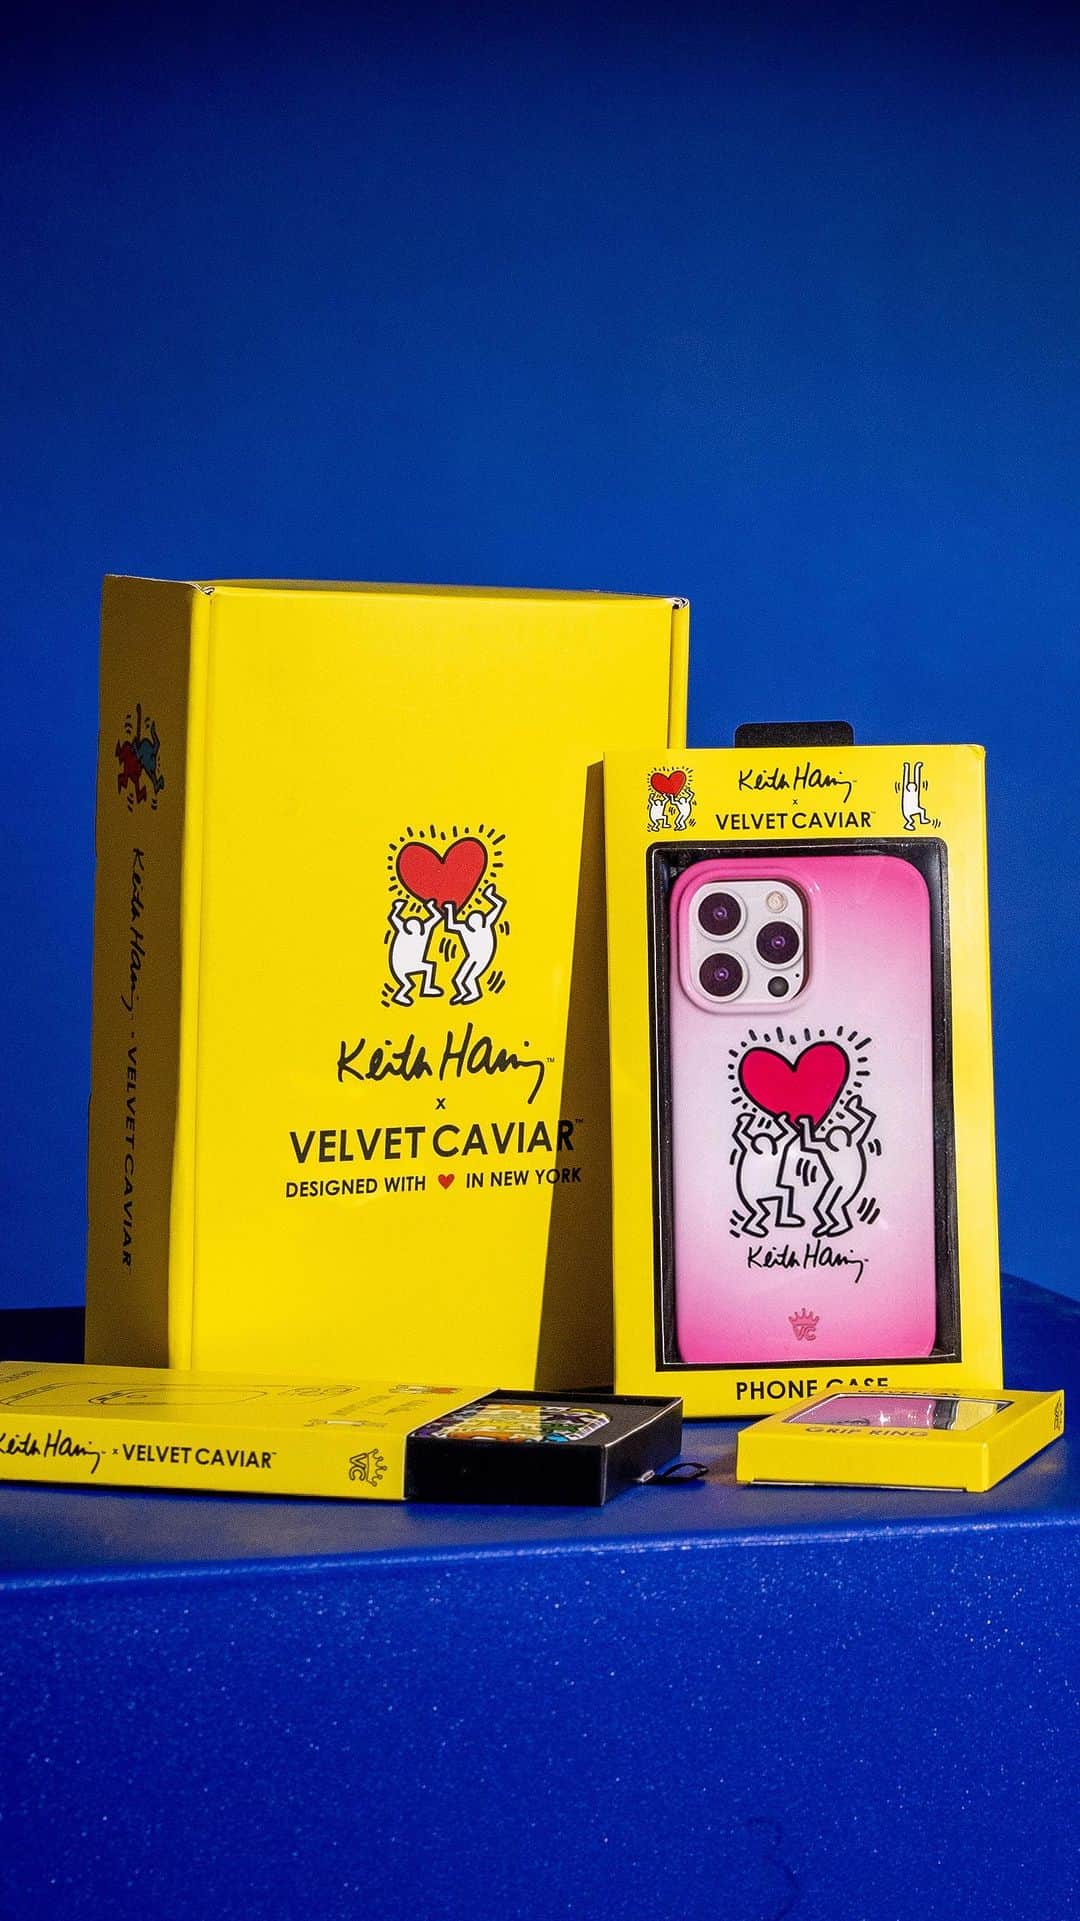 VELVETCAVIARのインスタグラム：「💛🗽NOW LIVE 🗽💛 Keith Haring x Velvet Caviar is HERE! “Art is for everyone” We’re so excited to continue Keith Haring’s legacy of bringing art to the people with our latest collaboration. We hope these cases inspire you to embrace your inner artist!  4 Collectors Cases: ❤️ Rainbow Dancers ❤️ Pastel Glitter ❤️ Pink Heart ❤️ Heart-ist  What makes this special? 💛 Each phone case is drop tested up to 8 feet and features state of the art 360* protection. 💛 Iconic Accessories! 2 AirPod Cases, 2 Power Packs and 4 Grip Rings 💛 Exclusive packaging makes this an essential for Keith Haring collectors.  🛍️ Launching Today 12/06 at 12 PM EST on http://velvetcaviar.com Note this capsule collection is anticipated to sell out fast! Get yours before they’re gone! #KeithHaringXVelvetCaviar @keithharingfoundation @artestarnyc © Keith Haring Foundation. Licensed by Artestar, New York」